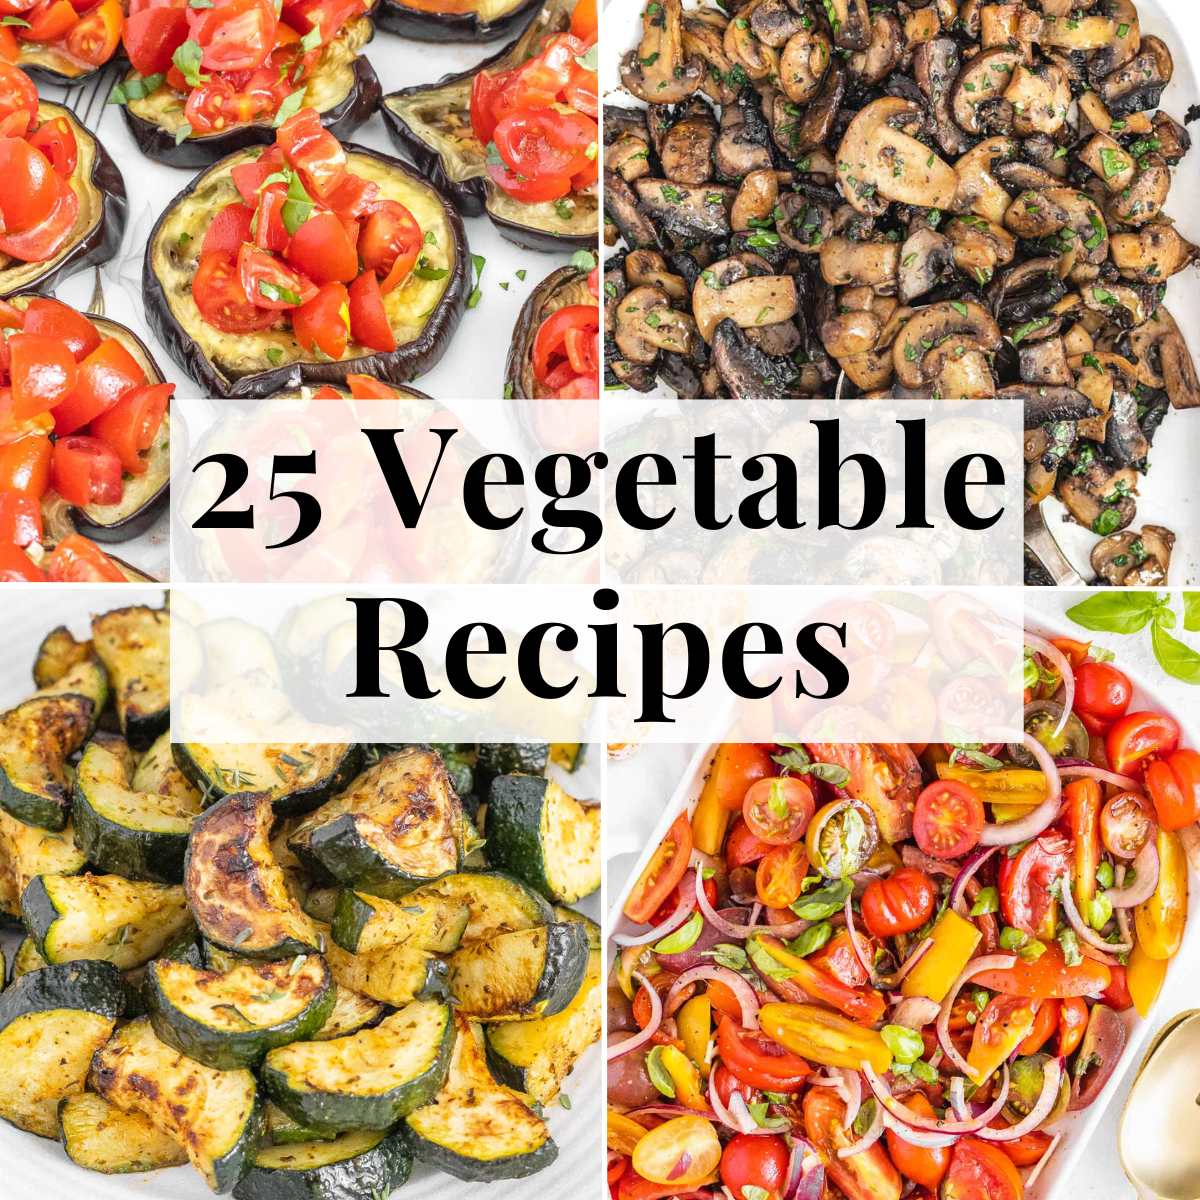 Easy vegetable recipes with eggplant and zucchini